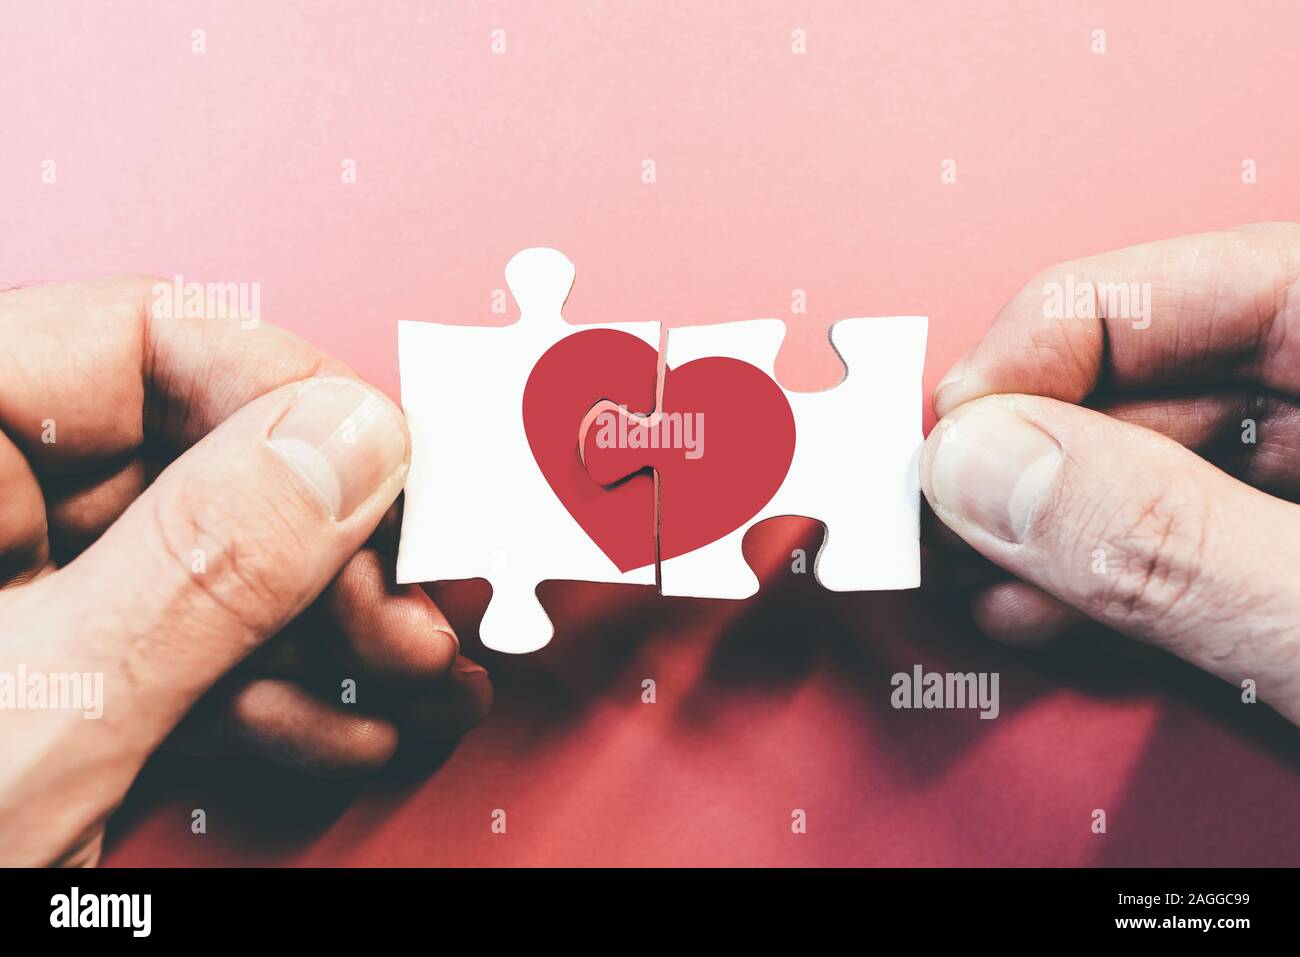 hands connecting or disconnecting jigsaw puzzle pieces with red heart, love or broken heart concept Stock Photo